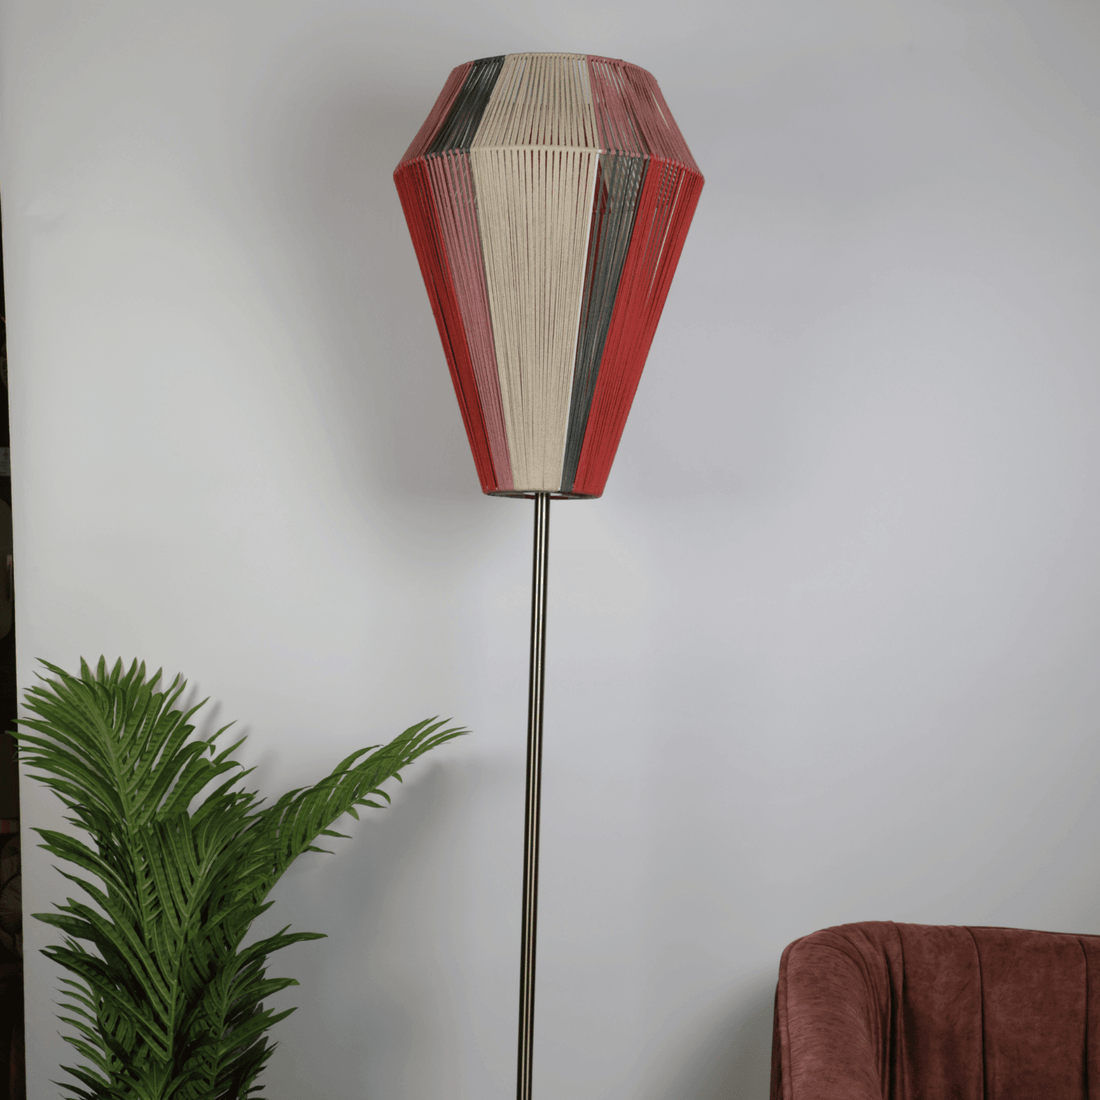 Saneka Handcrafted Floor Lamp by The Light Library